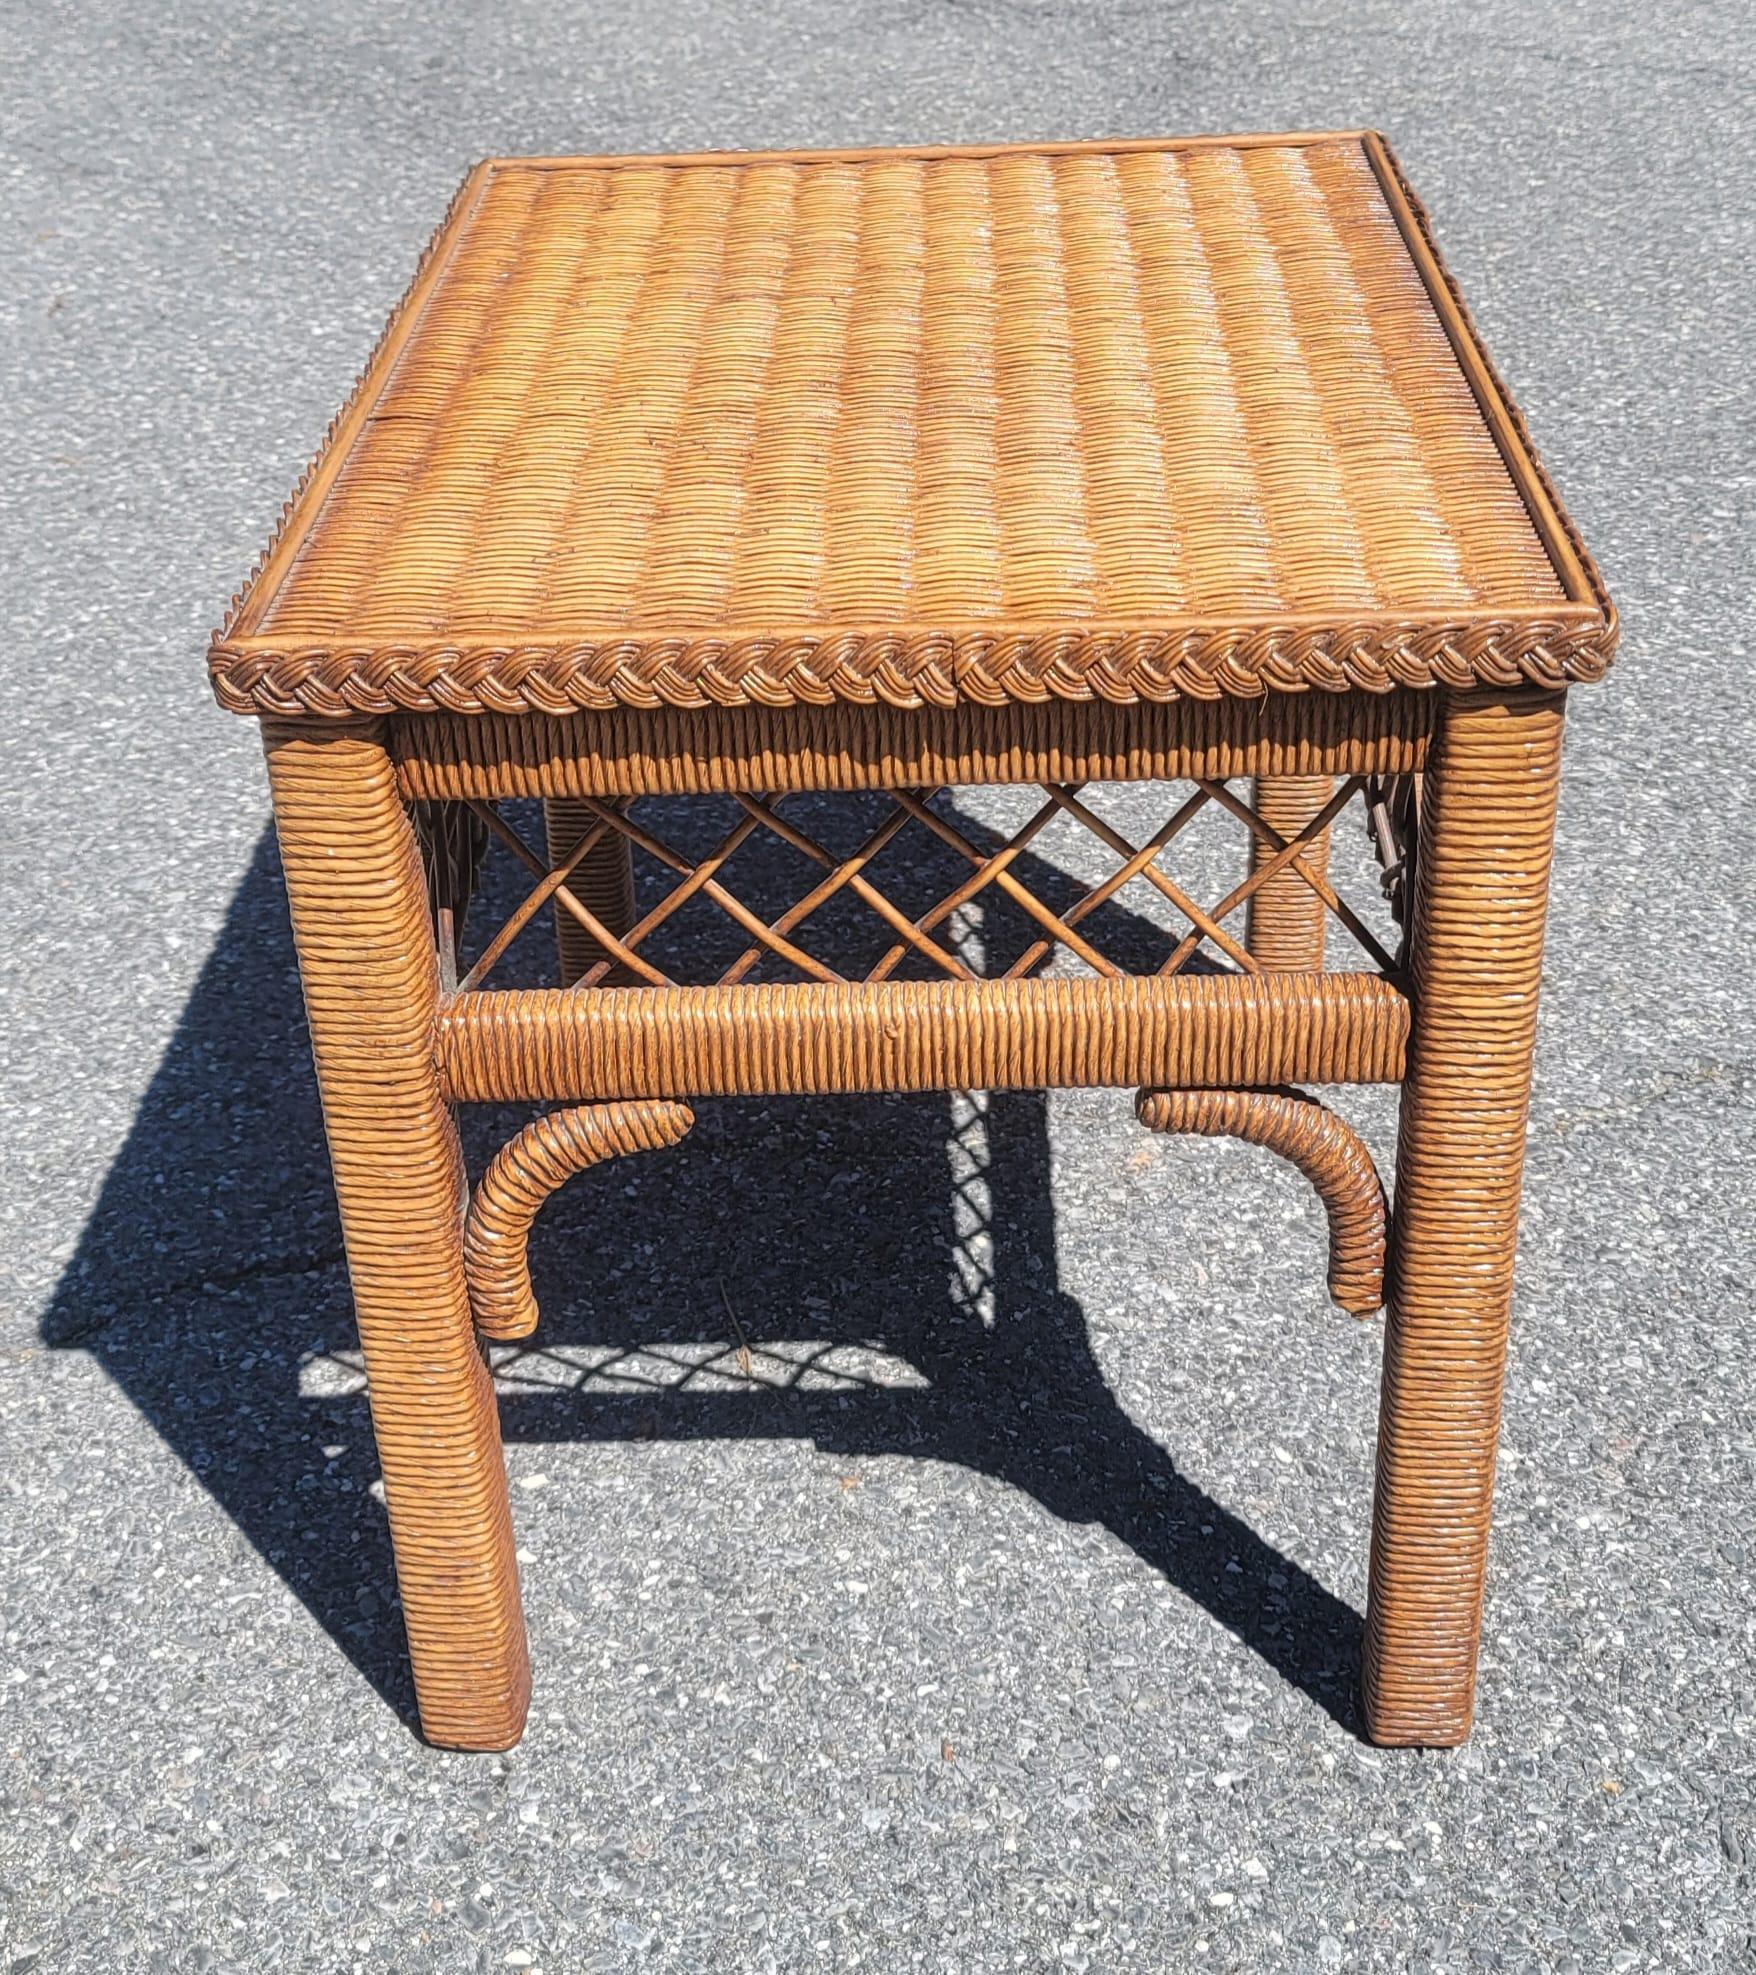 20th Century Henry Link Boho Chic Wicker, Rattan and Glass Top Side Table For Sale